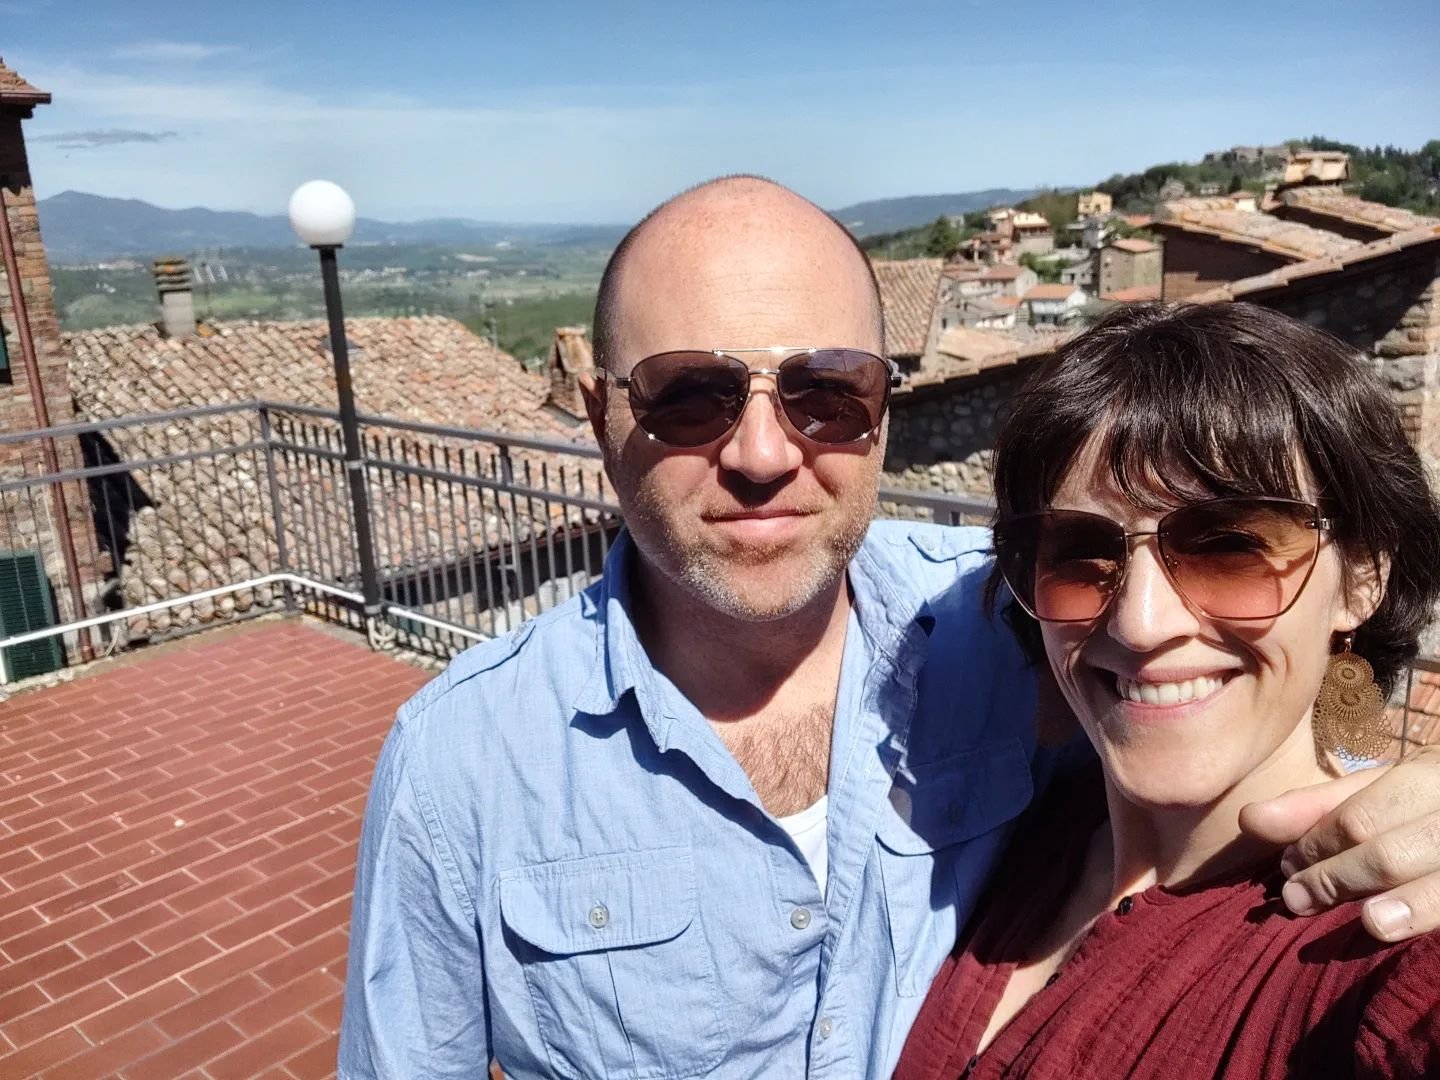 Our first picture together on our terrace 🥰 Dying to be back in our home there...together!!
.
.
#umbriaitalia #umbriaitaly #umbrianhilltowns #umbria #umbriait #dreamingofitaly #dreamofitaly #italiandreams #mydream